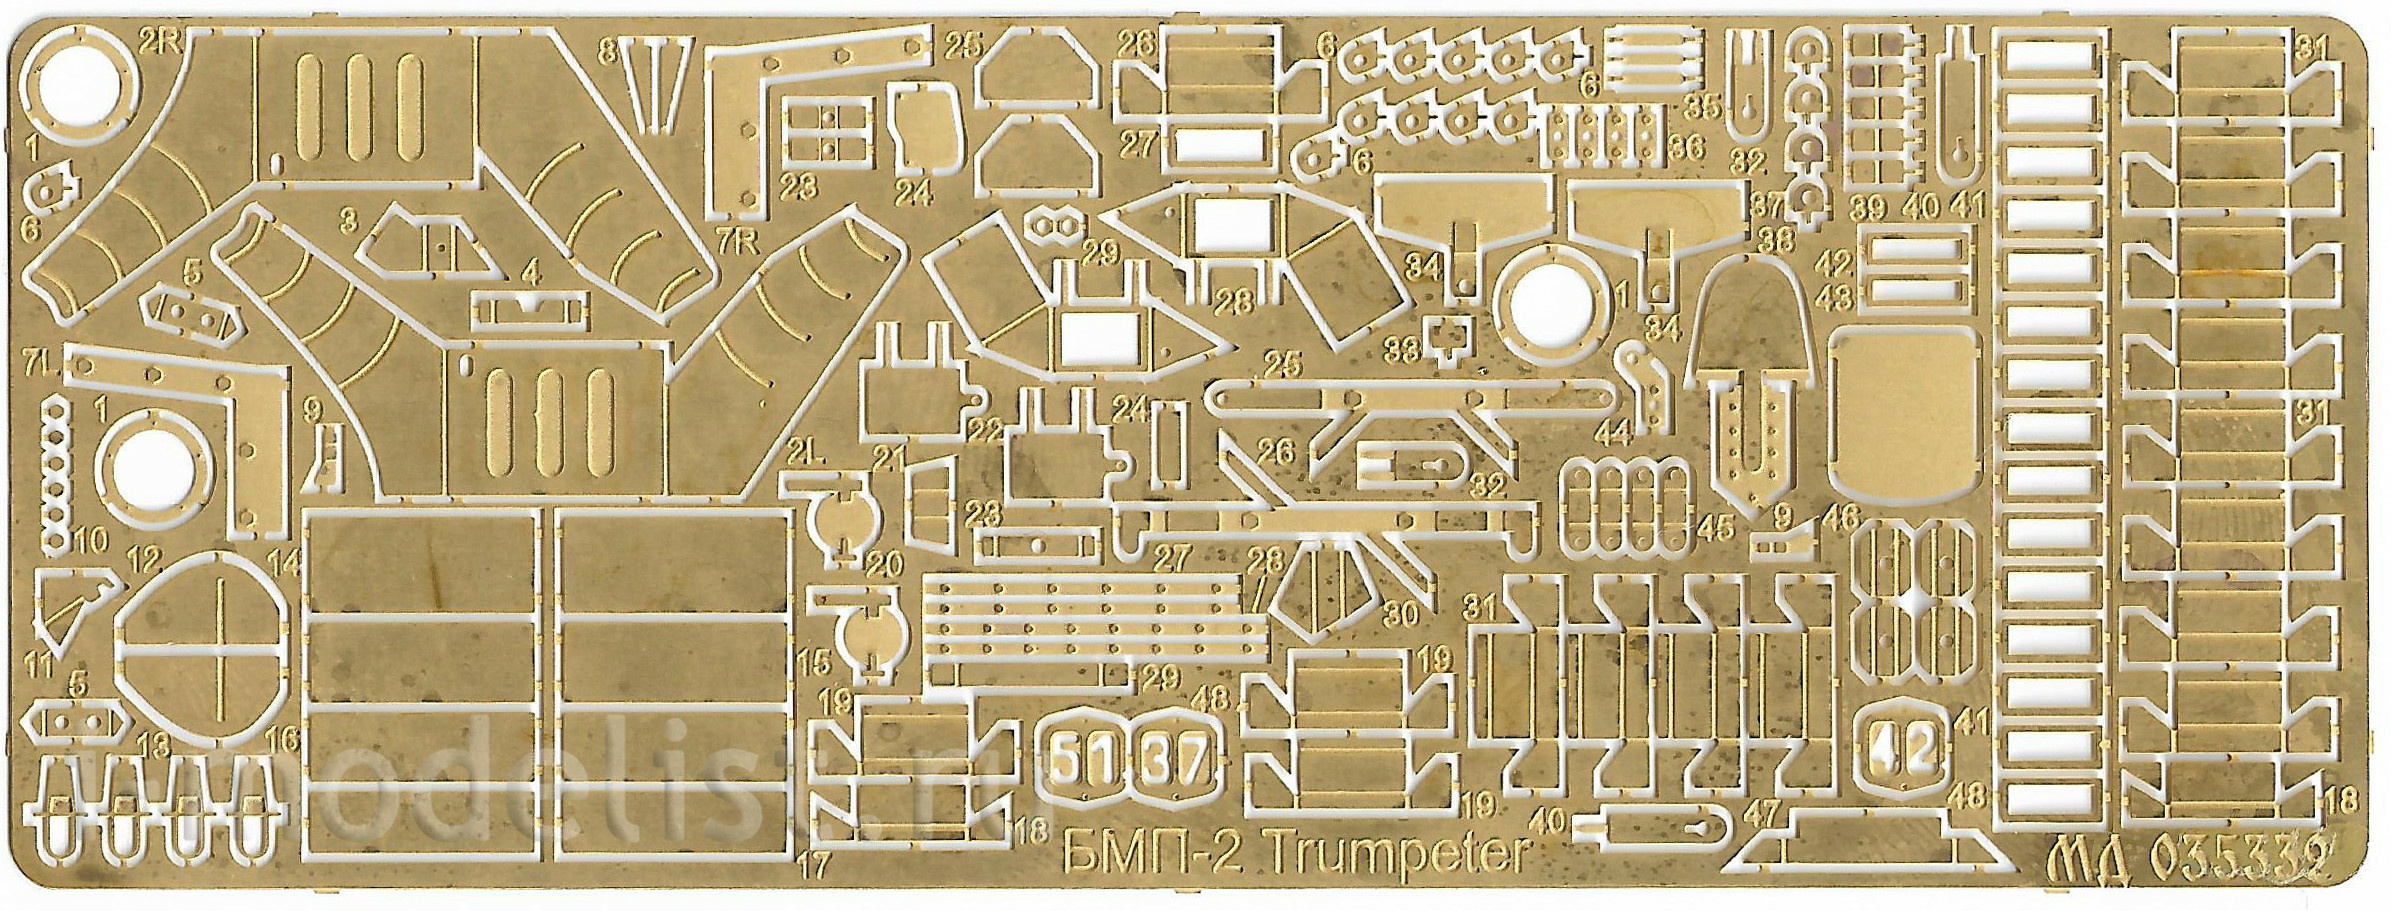 035332 Microdesign 1/35 BMP-2 (Trumpeter)